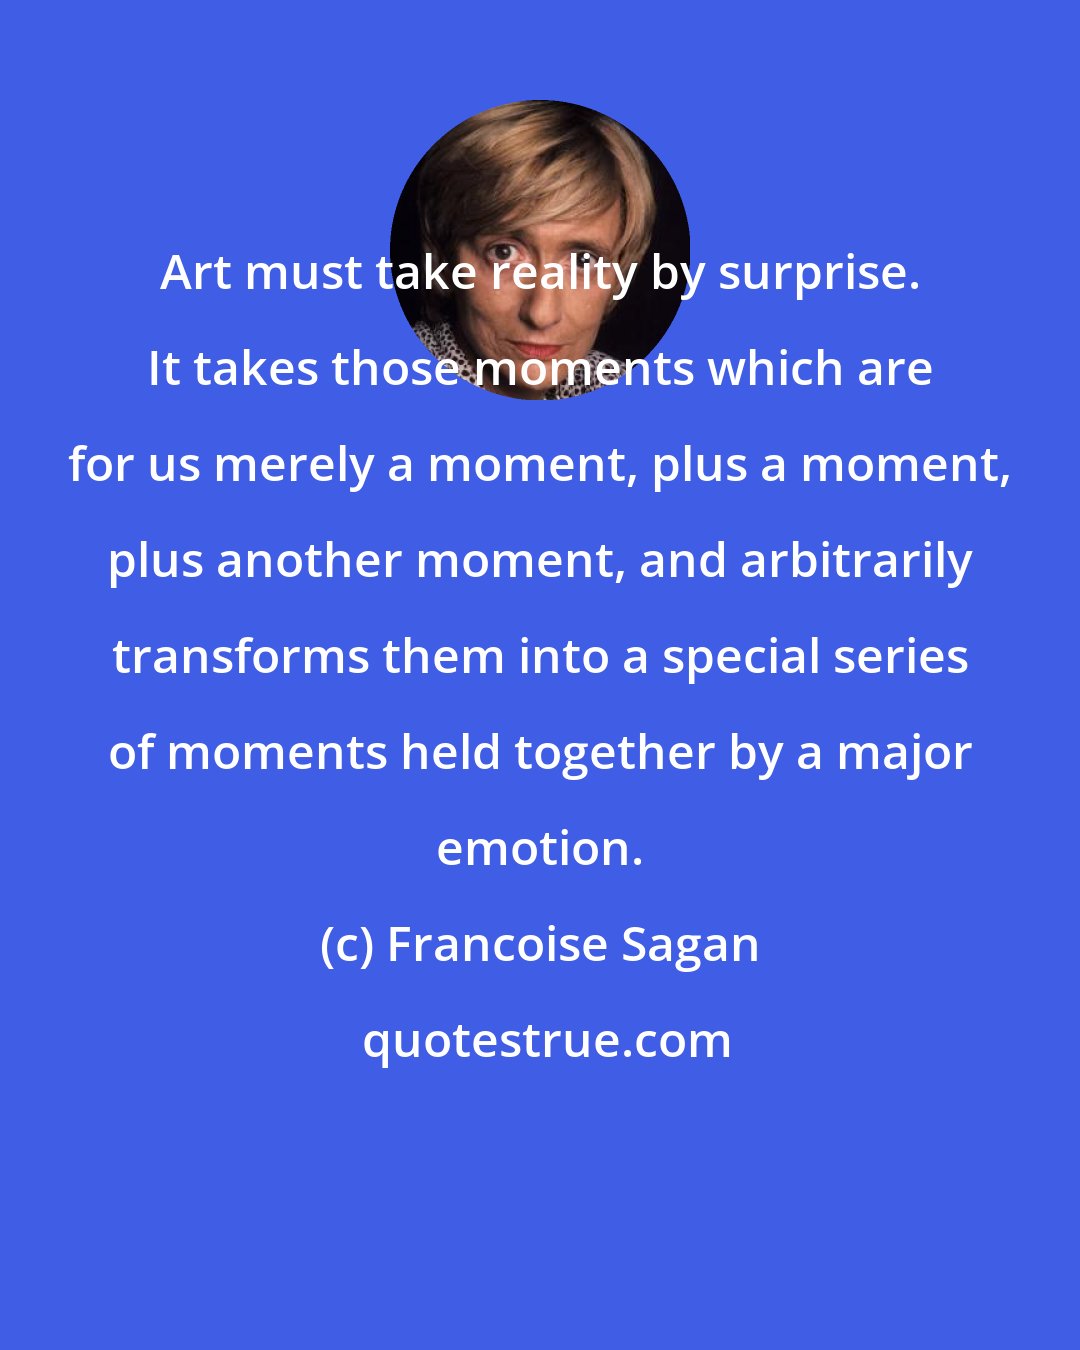 Francoise Sagan: Art must take reality by surprise. It takes those moments which are for us merely a moment, plus a moment, plus another moment, and arbitrarily transforms them into a special series of moments held together by a major emotion.